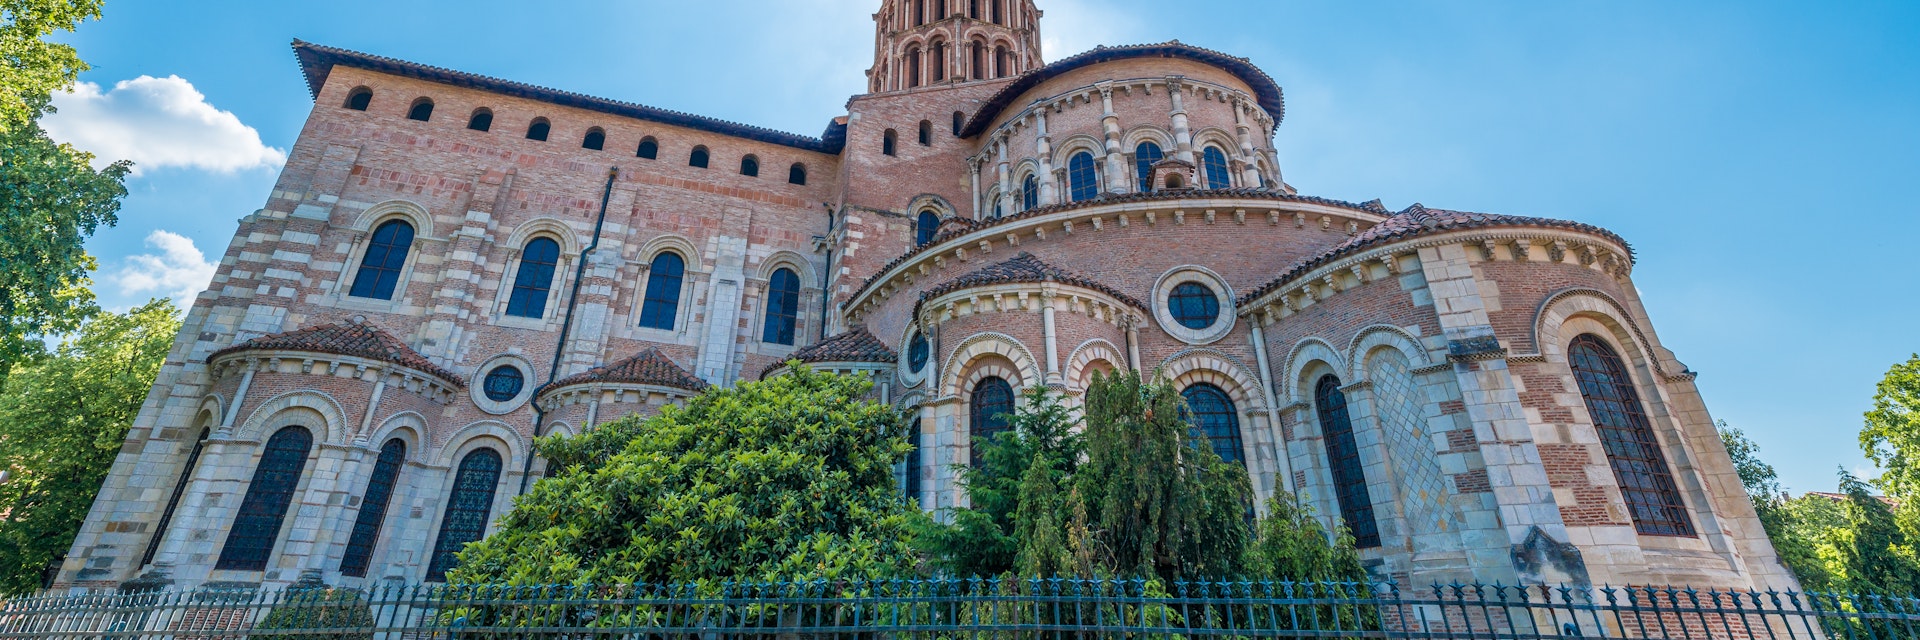 The Basilica of St. Sernin, built in Romanesque style between 1080 and 1120 in Toulouse, Haute-Garonne, Midi Pyrenees, southern France.